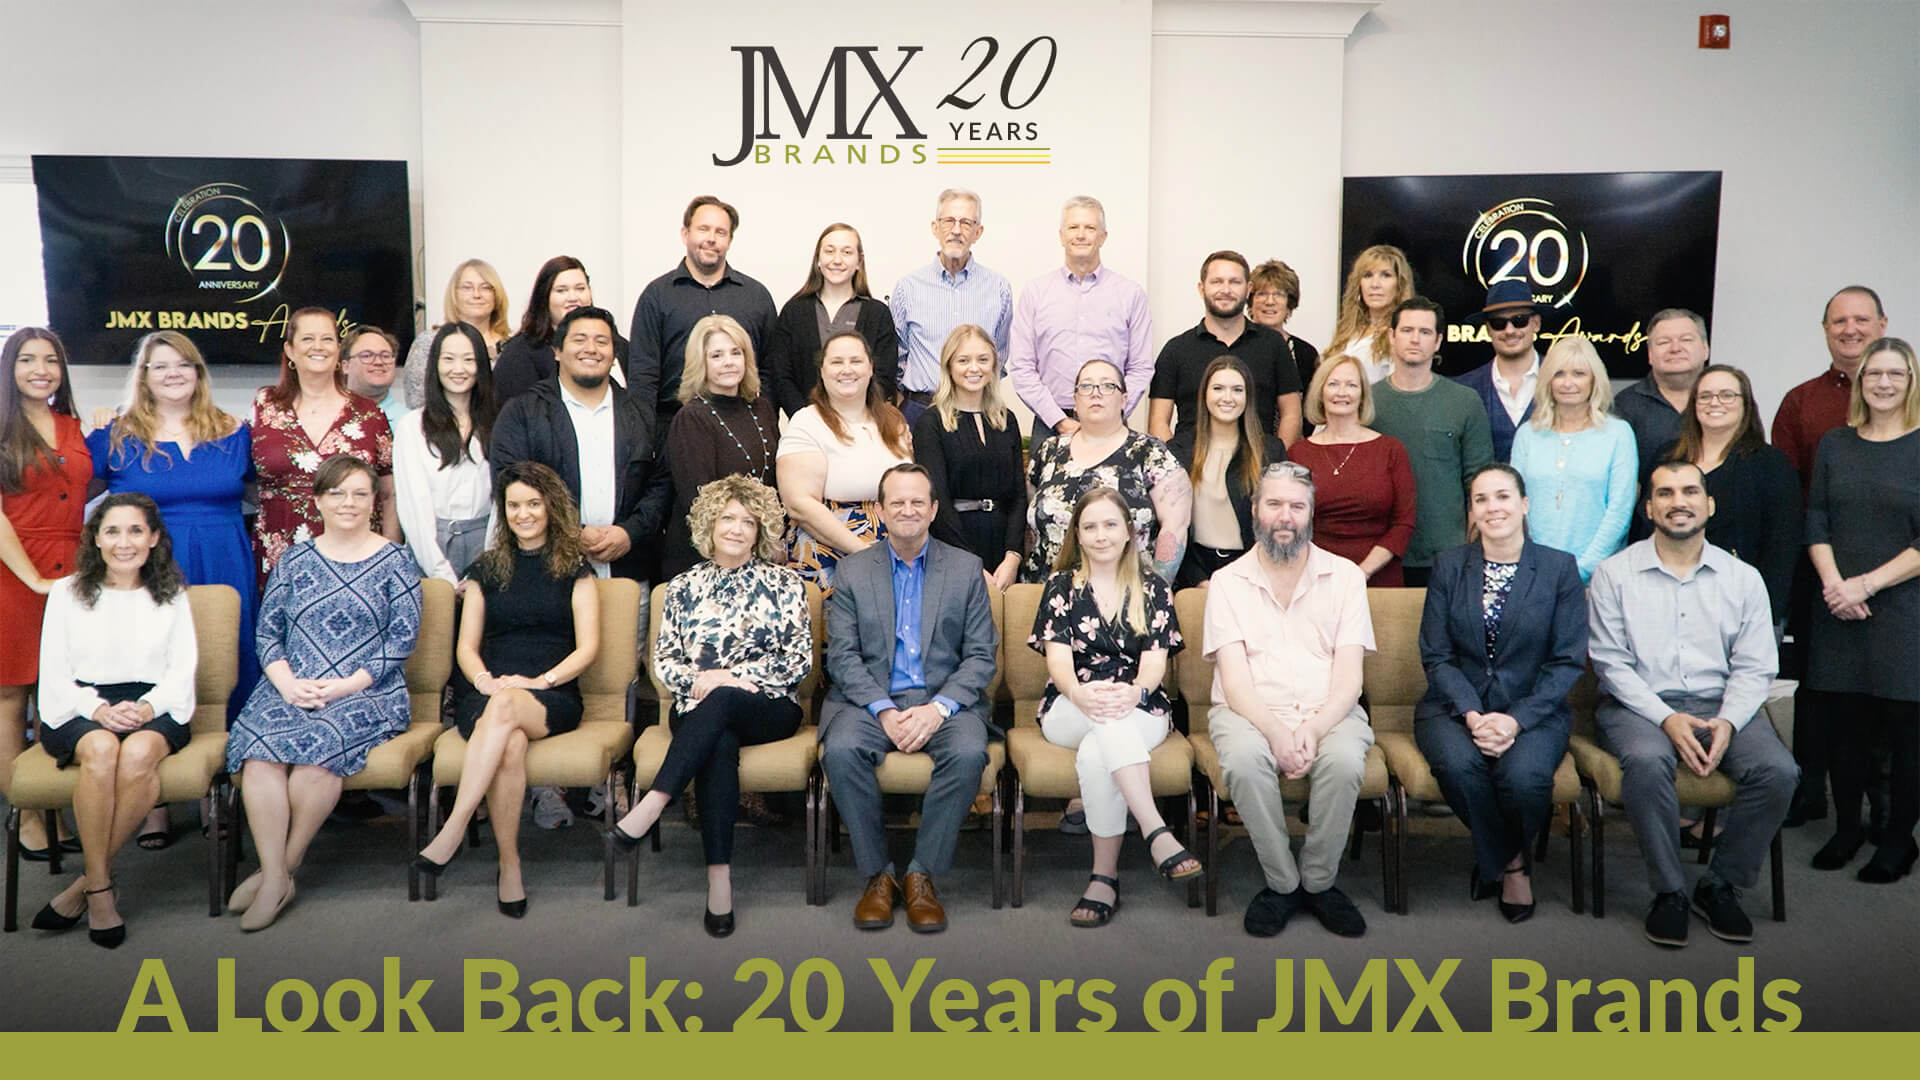 a group photo of JMX Brands employees with the title "A Look Back: 20 Years of JMX Brands"